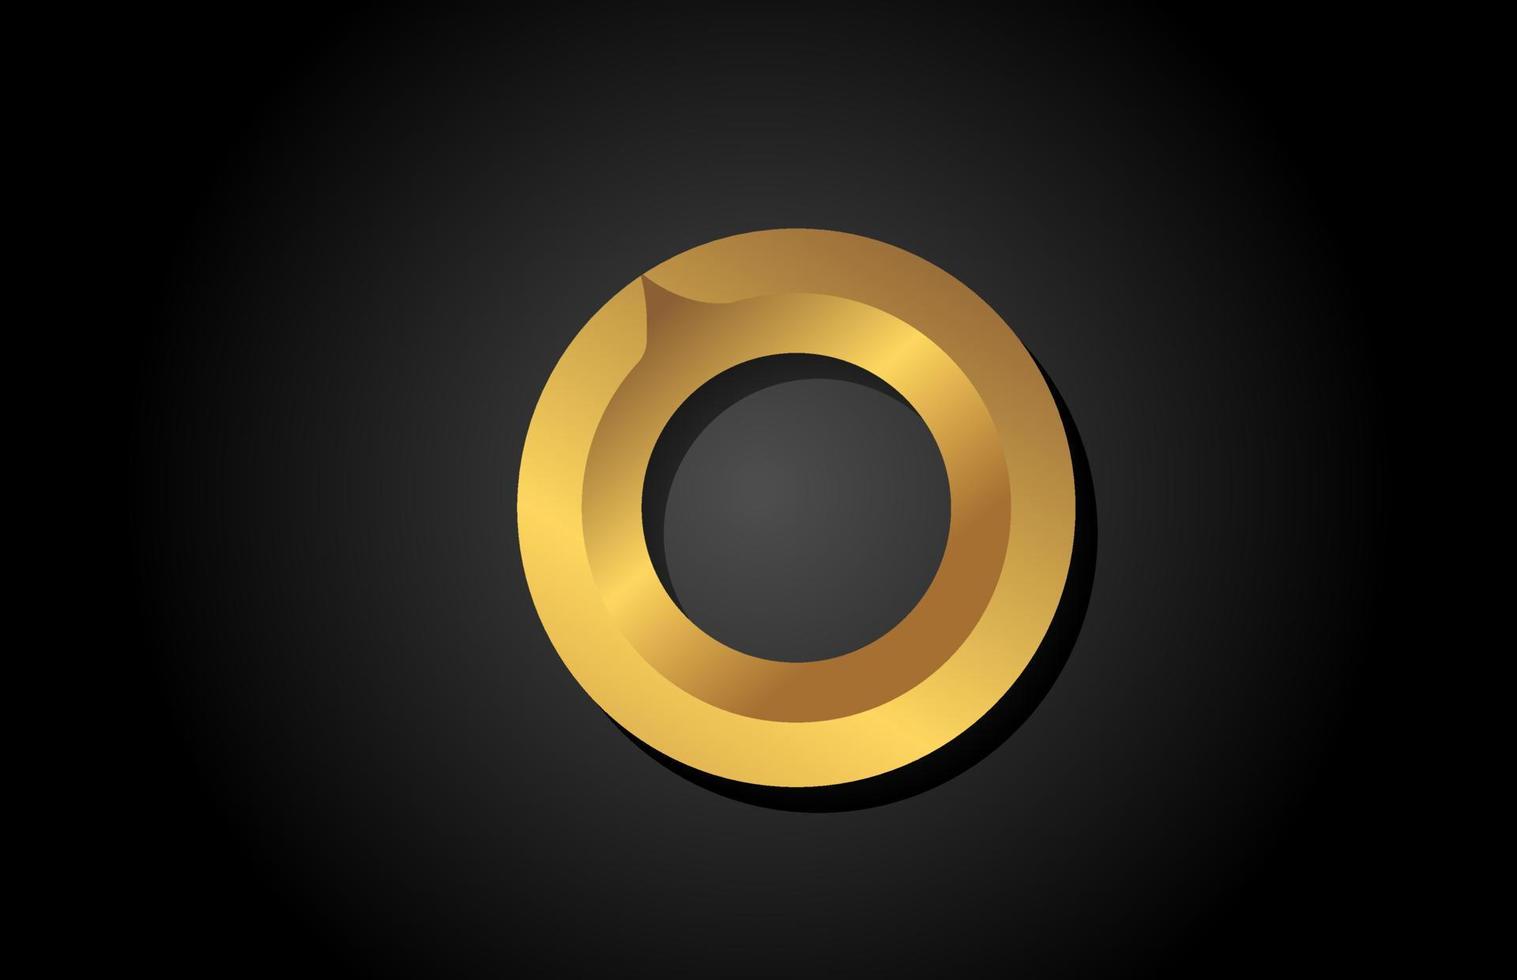 gold golden O alphabet letter logo icon design. Company template for luxury business vector